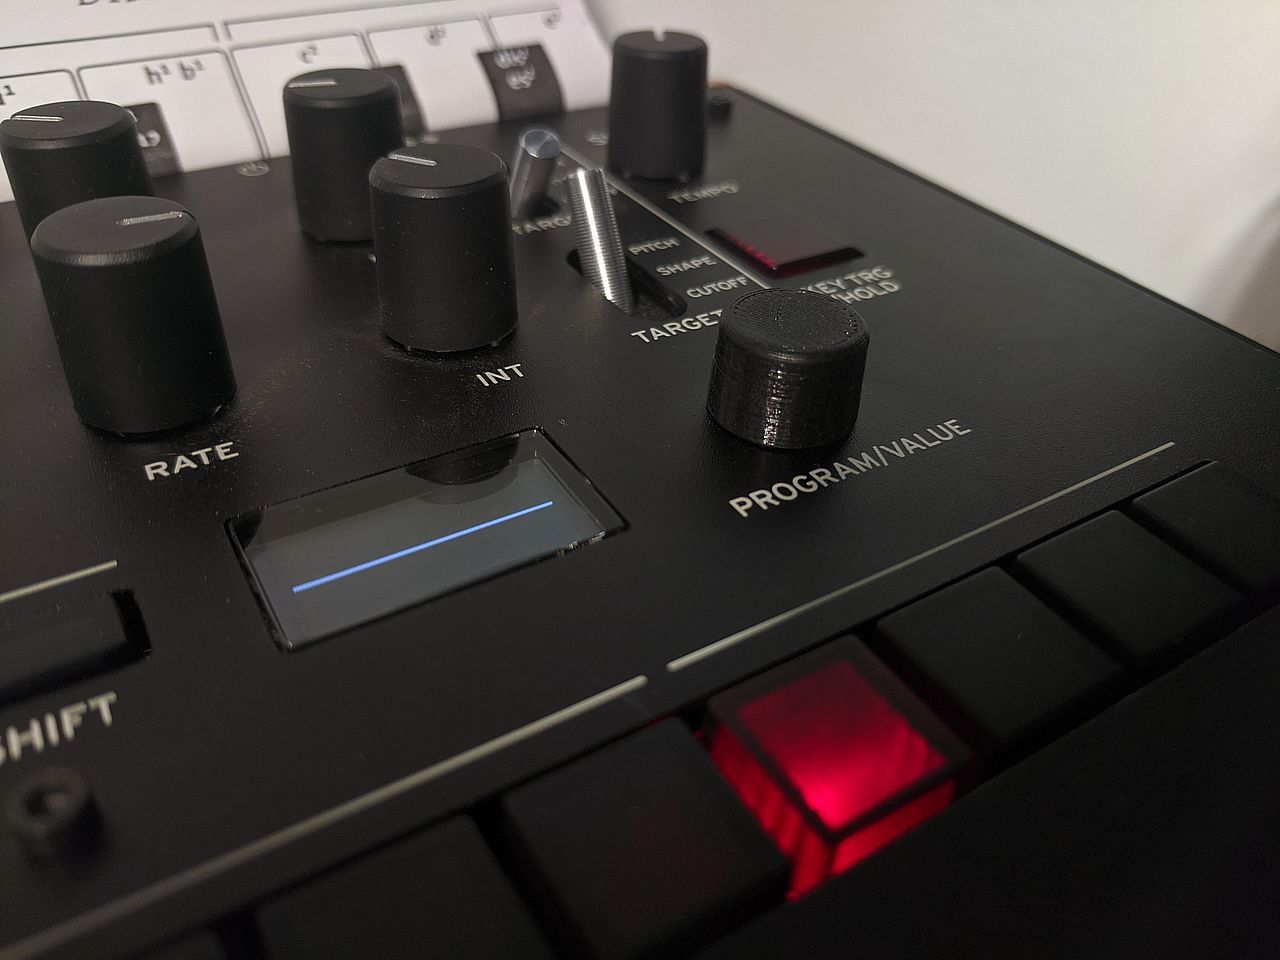 Special Knobs for Korg Monologue and Minilogue or similar